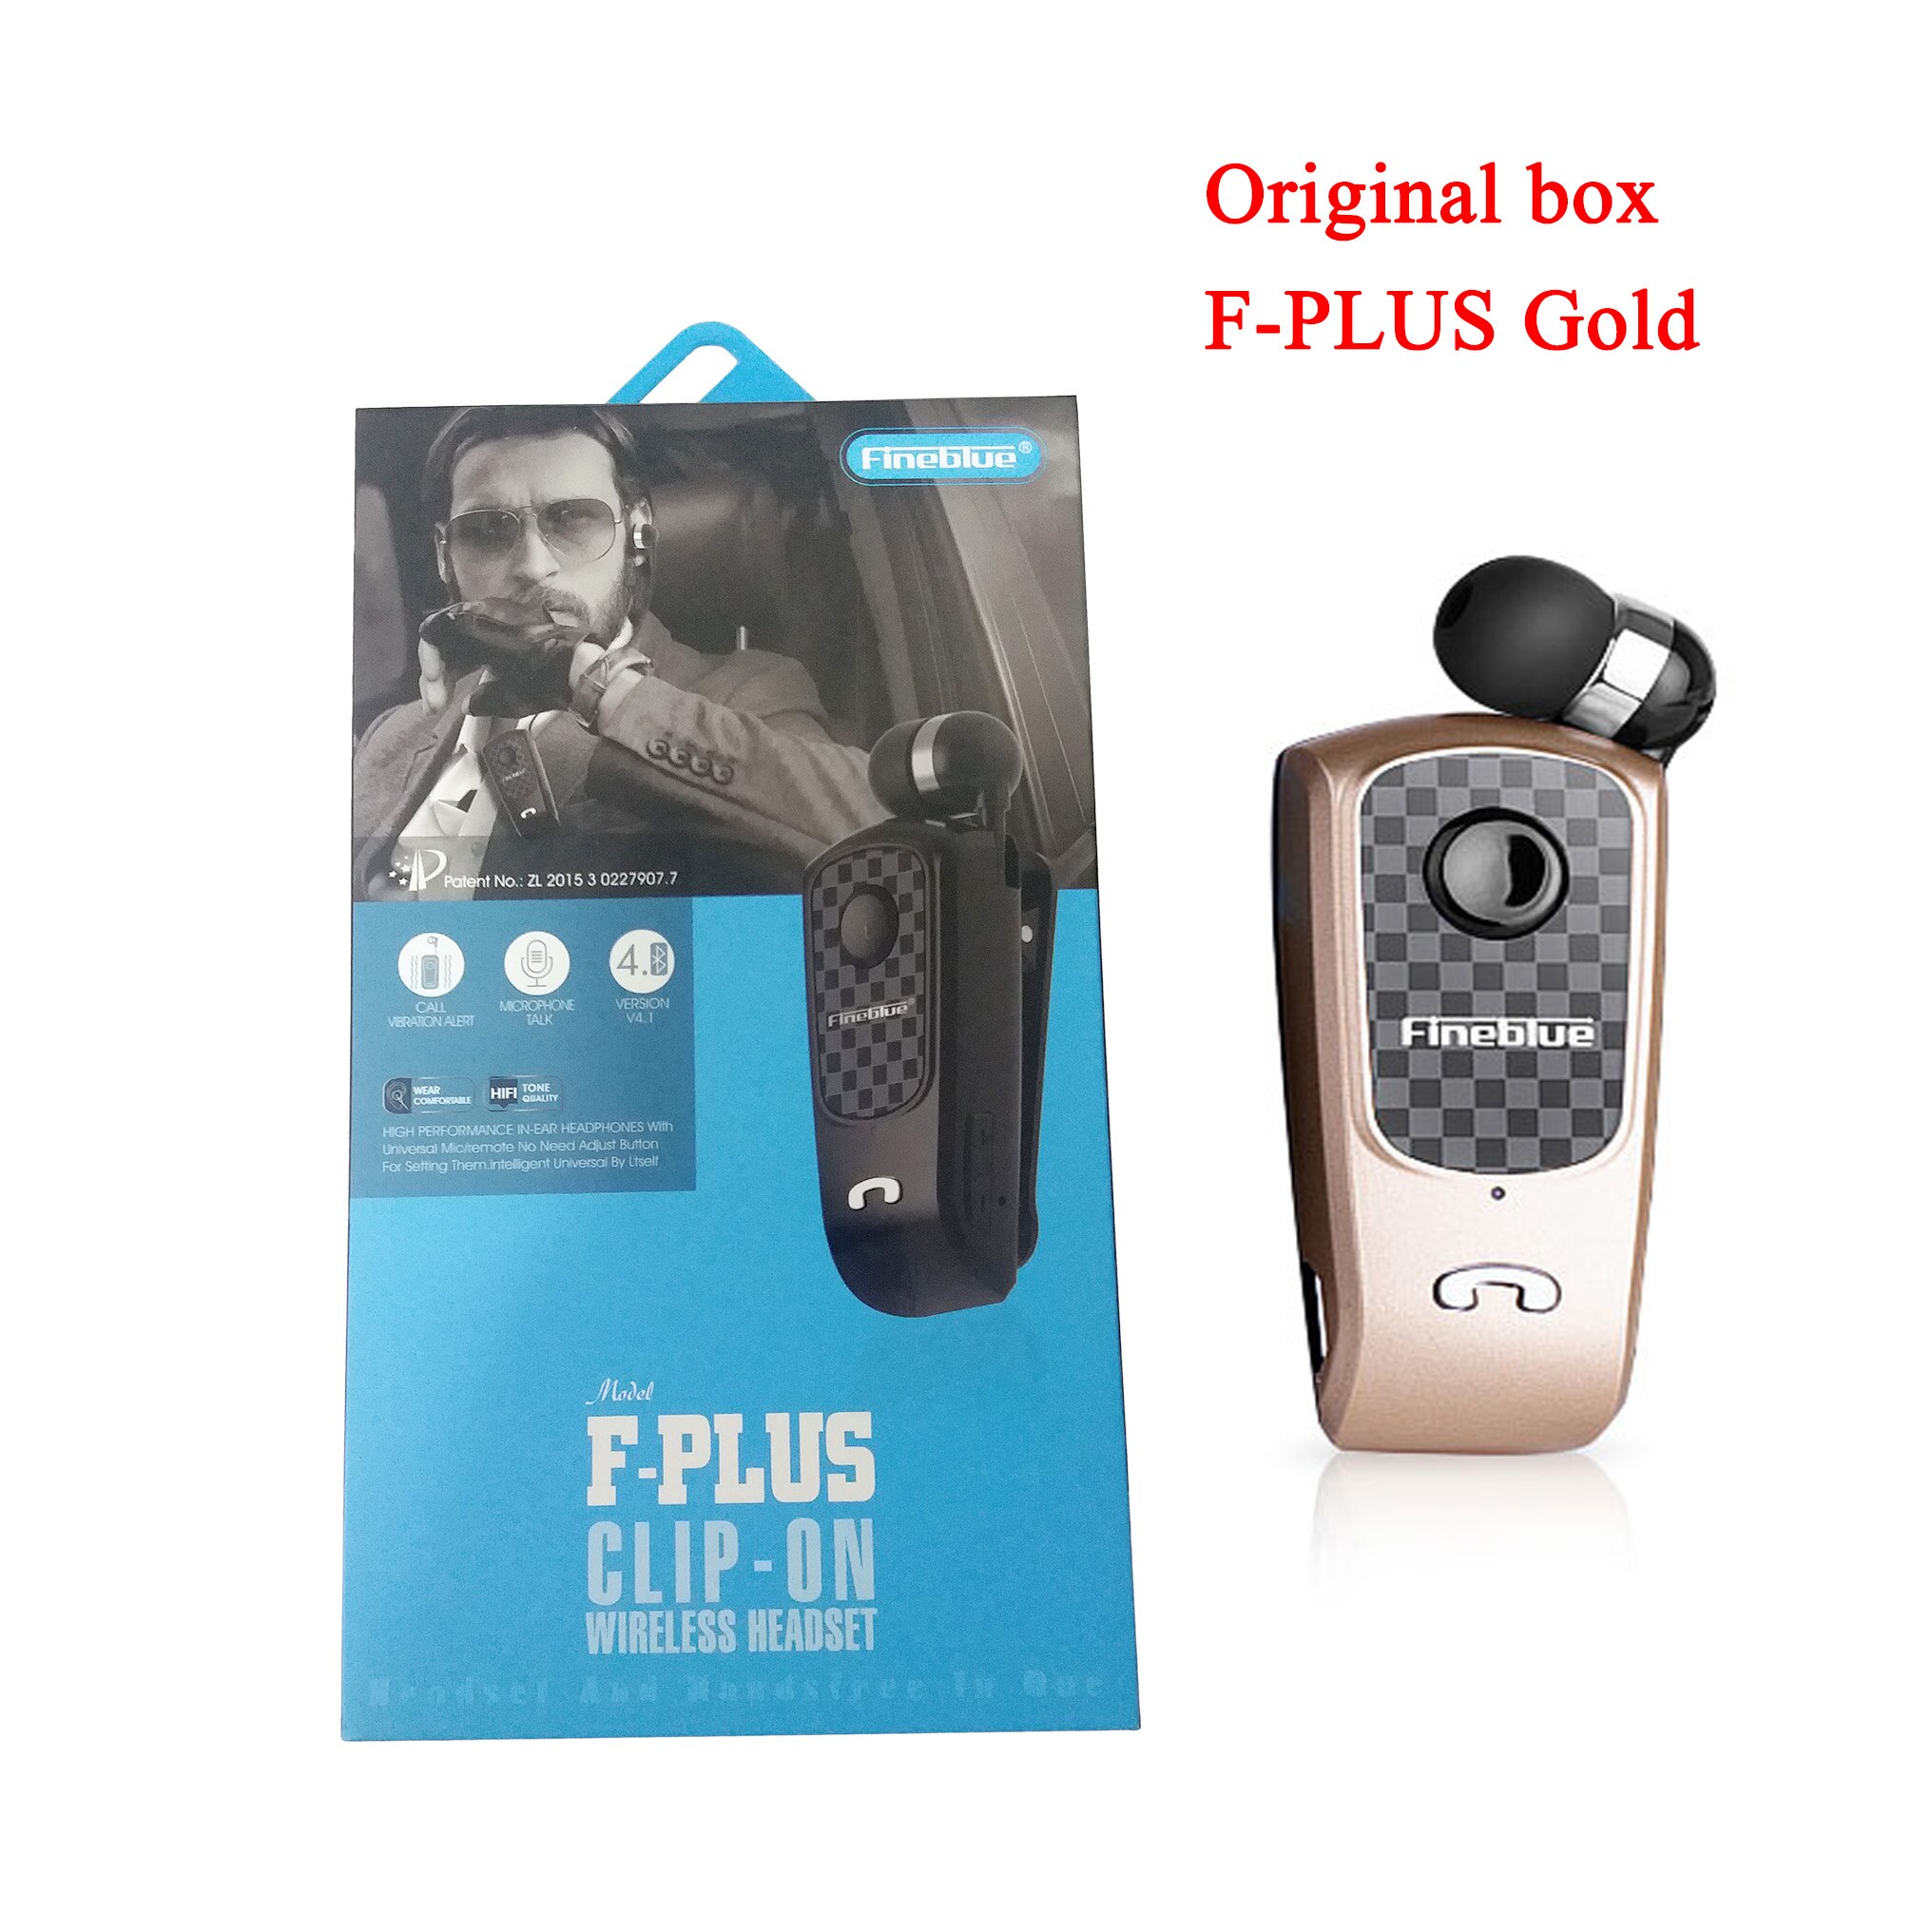 Fineblue Bluetooth F PLUS Mini Wireless Clip-on Bluetooth V5.0 Headset Headphone Hands-free Calls Time 10 hours Came Earphone: Gold Retail box